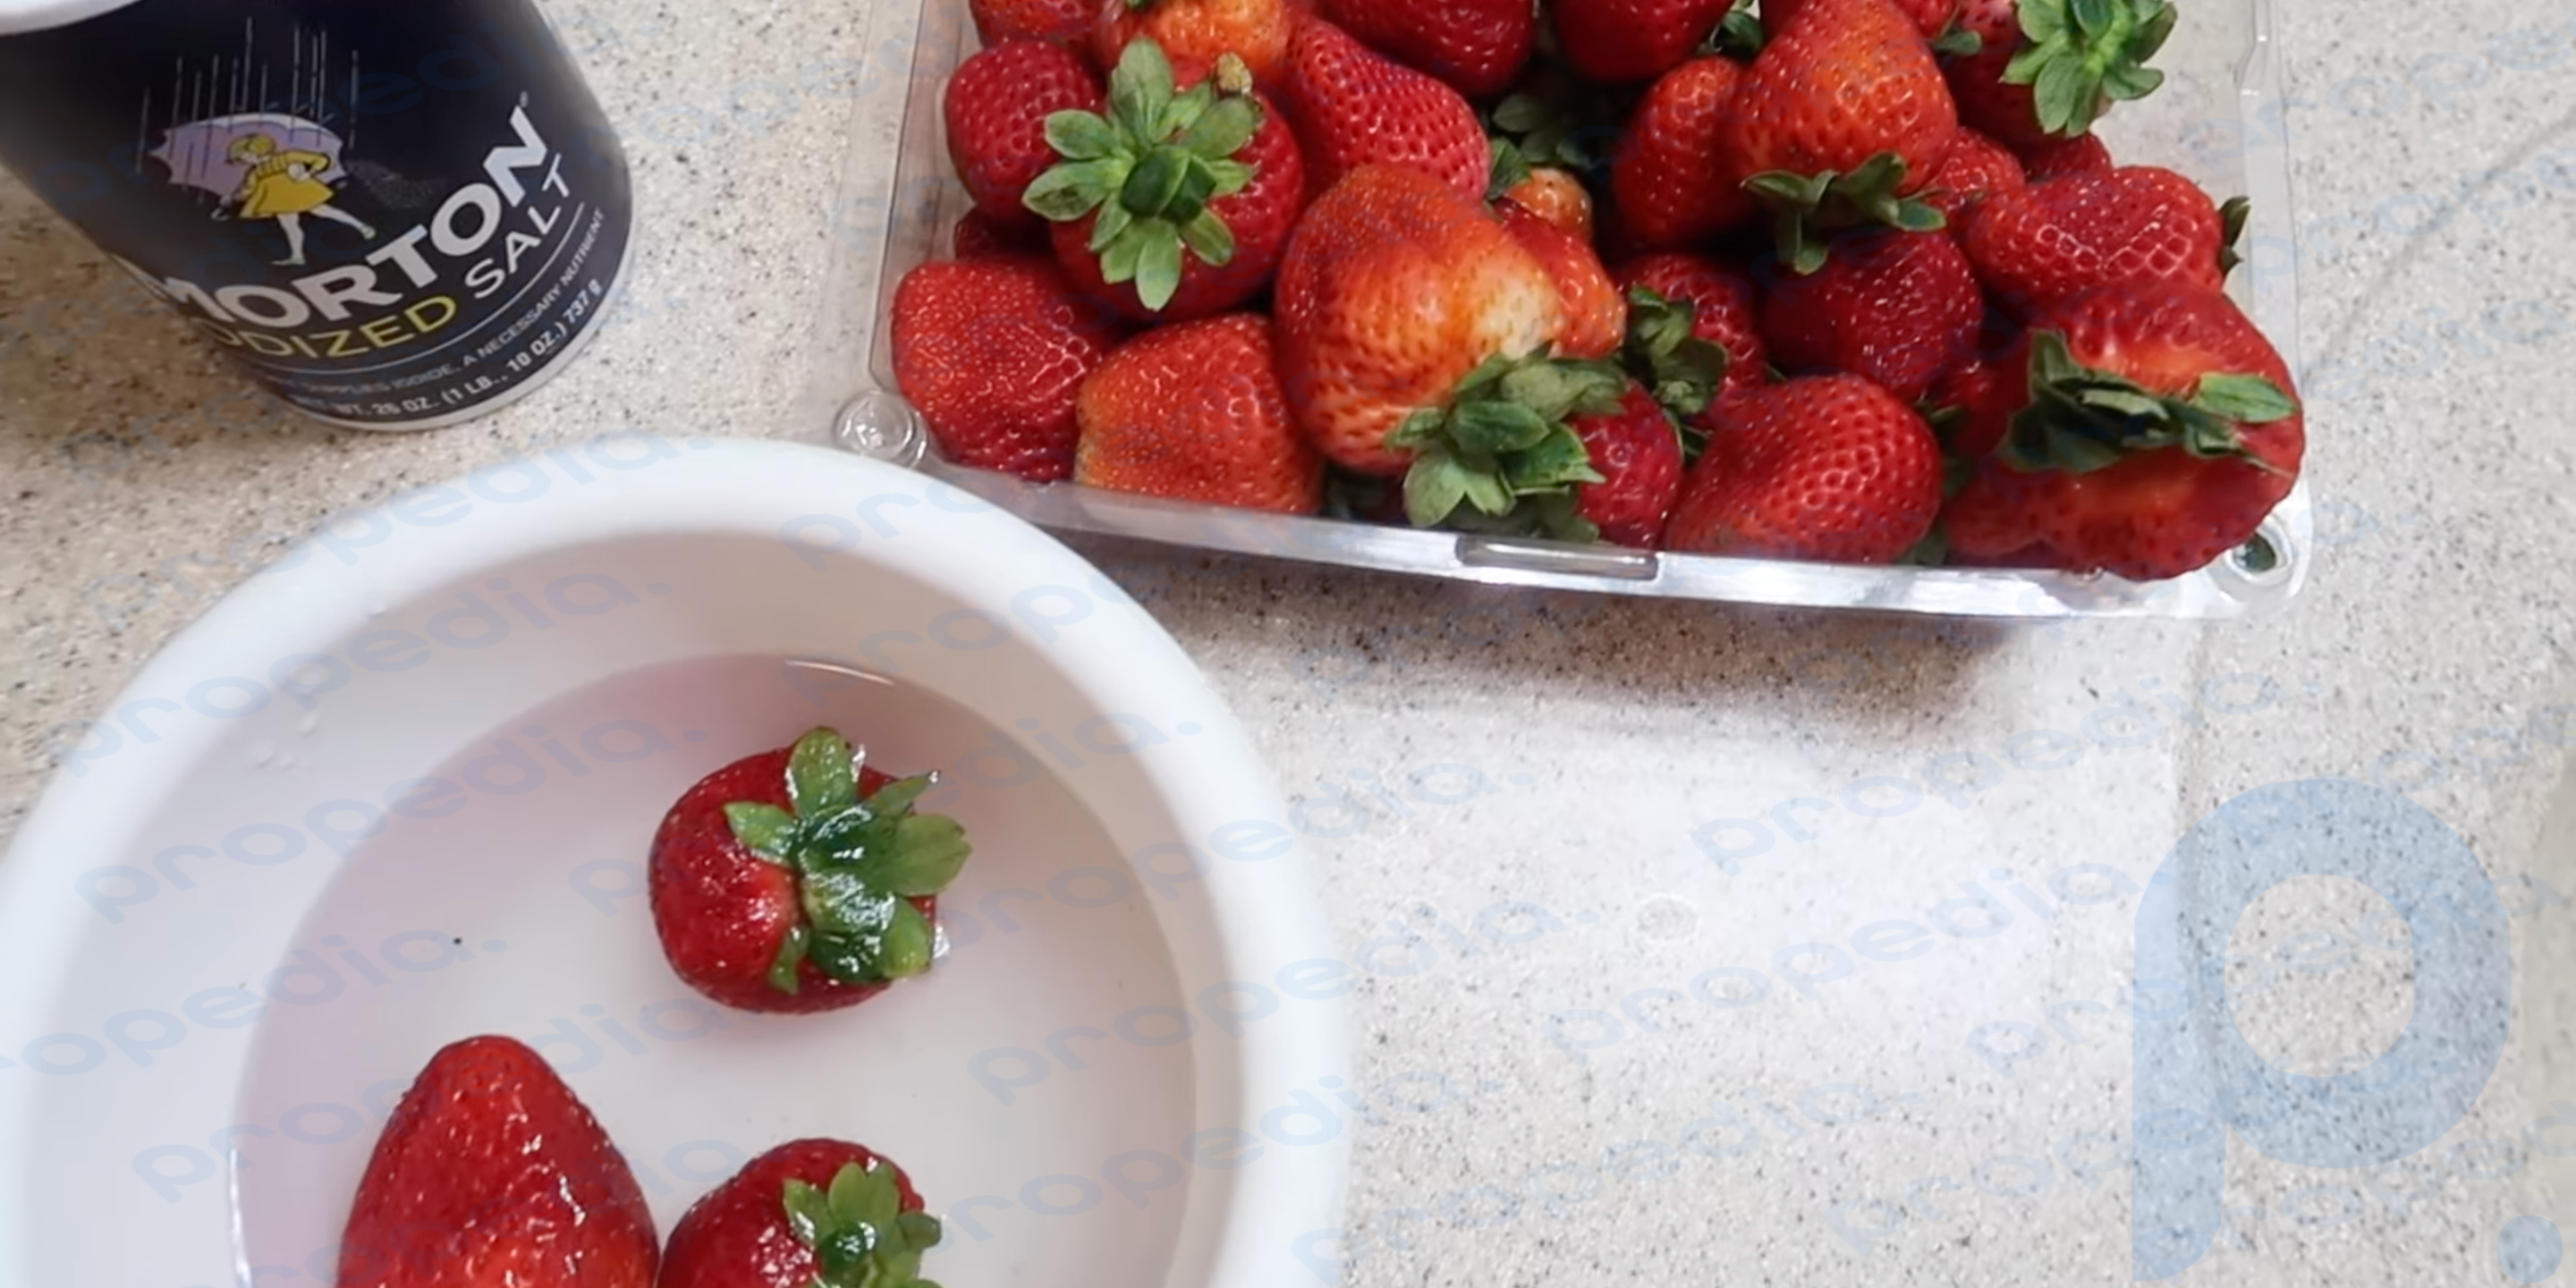 How to properly wash strawberries with salt